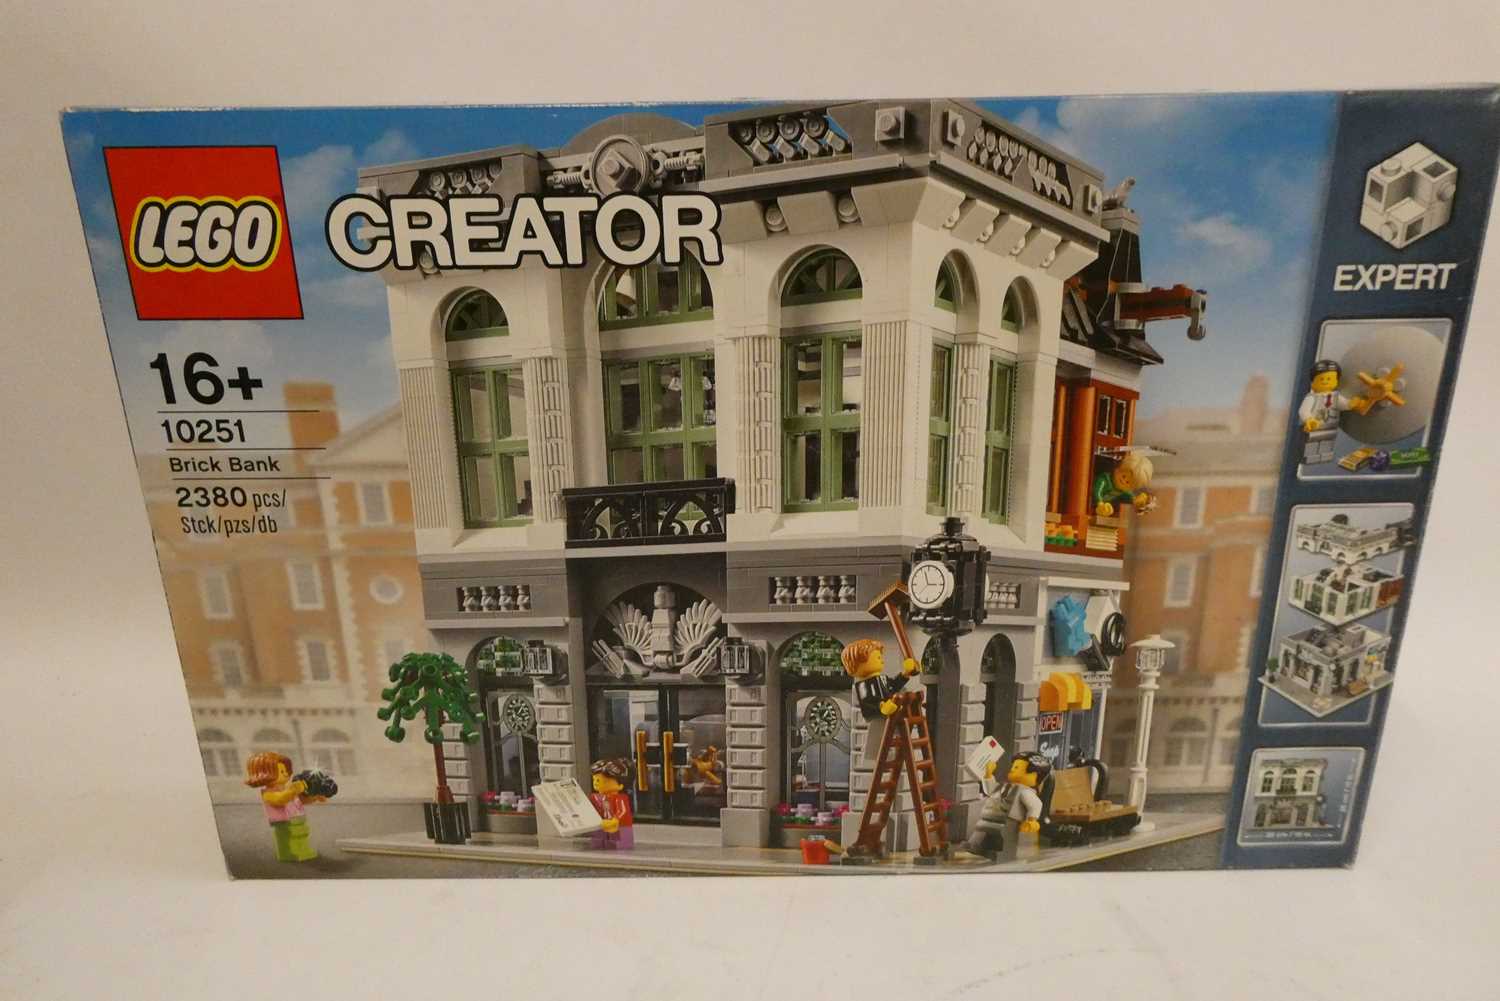 Lego set 10251, Creator, Brick Bank, boxed Condition Report: Opened, built, unchecked for